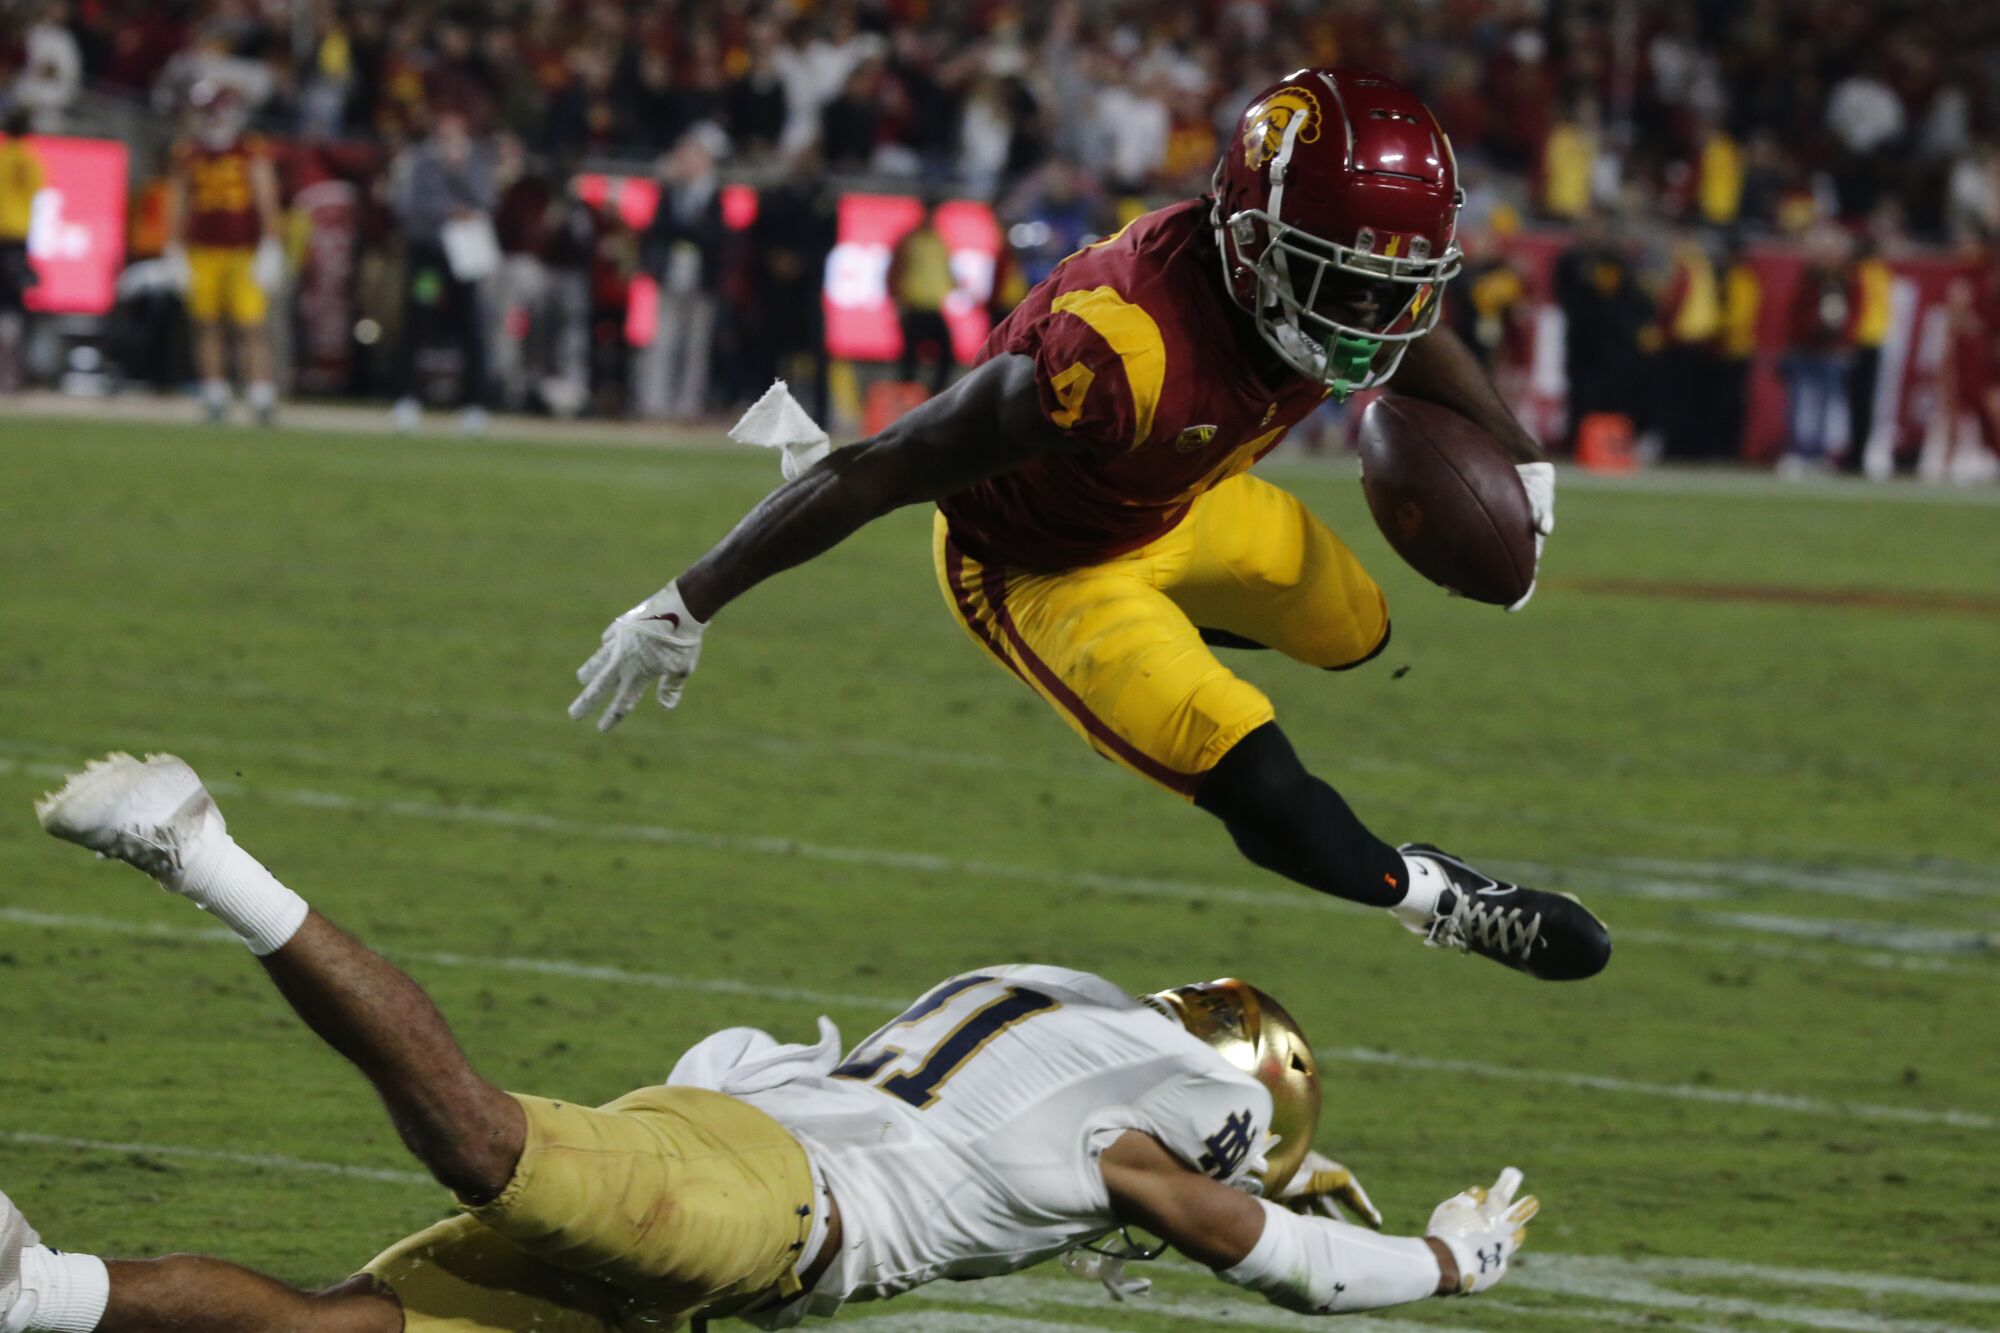 USC receiver Mario Williams hurdles over Notre Dame cornerback Jaden Mickey after making a catch in the third quarter.